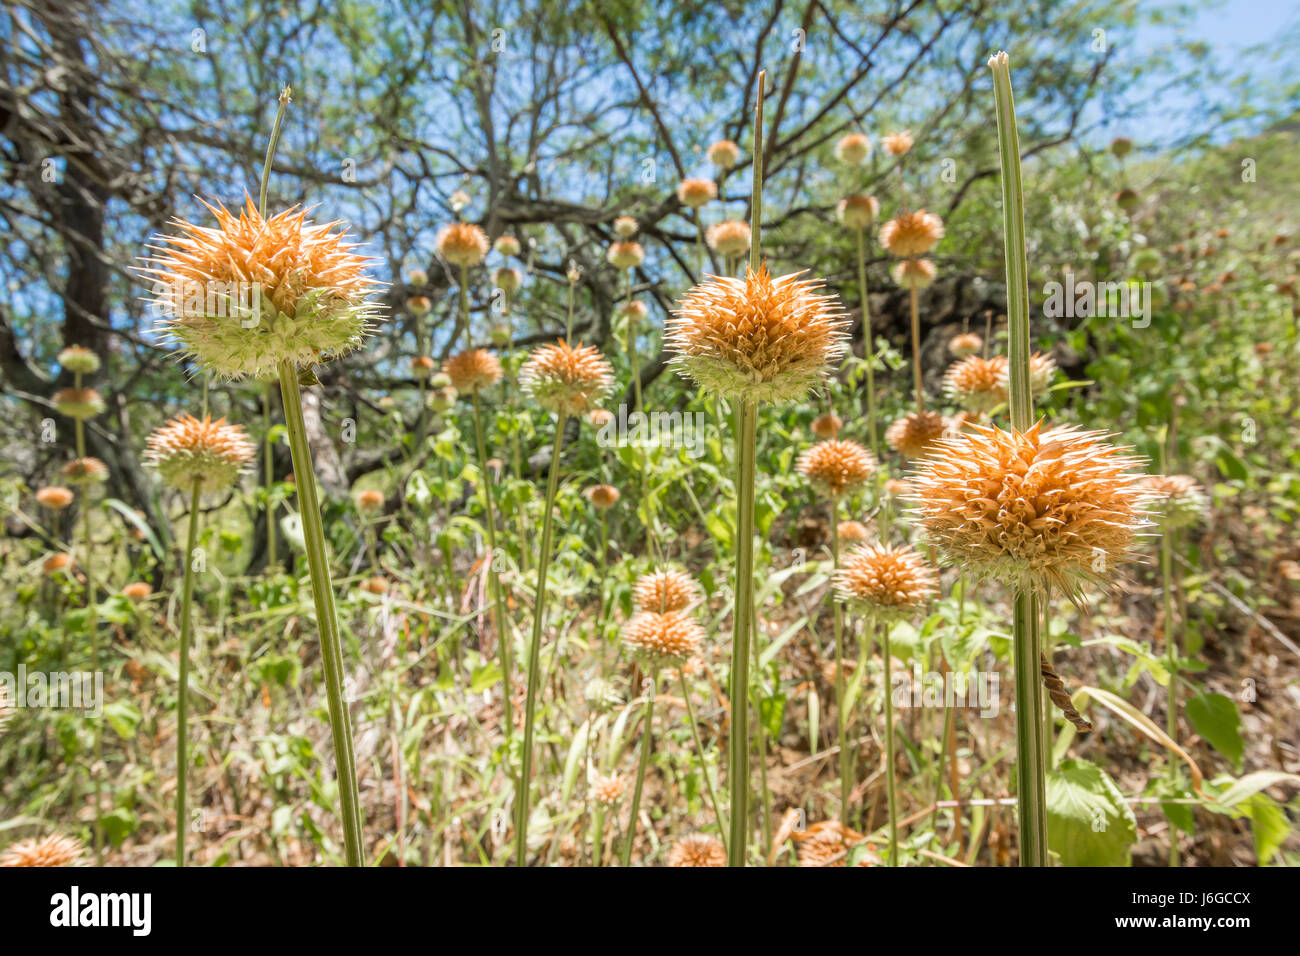 Dozens of tall budding lion’s ear plants, also known as klip dagga, growing in the wild. Stock Photo